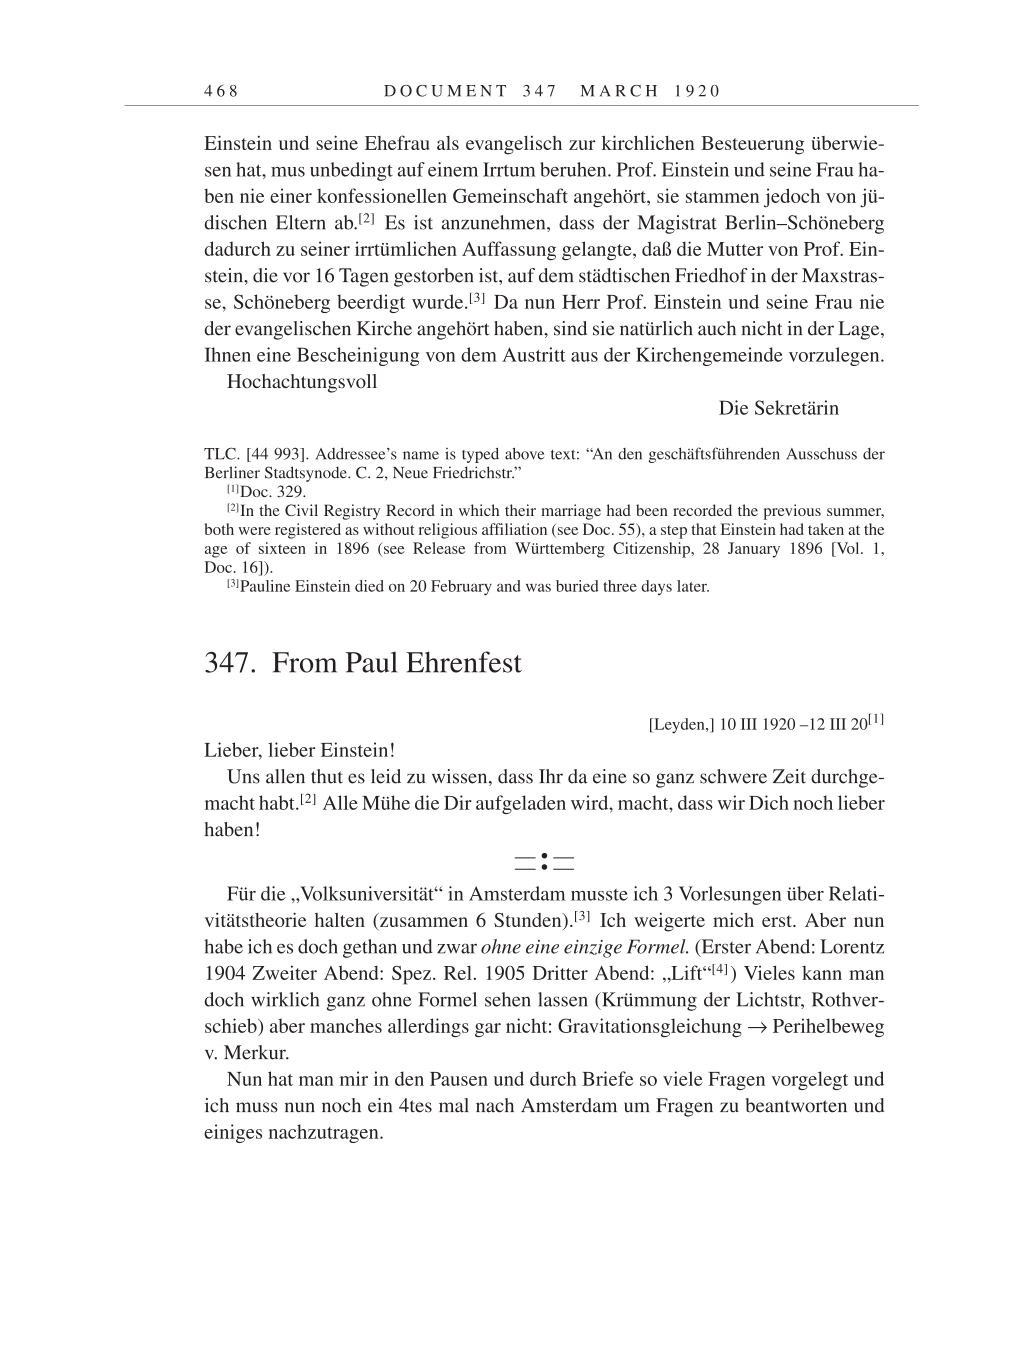 Volume 9: The Berlin Years: Correspondence January 1919-April 1920 page 468